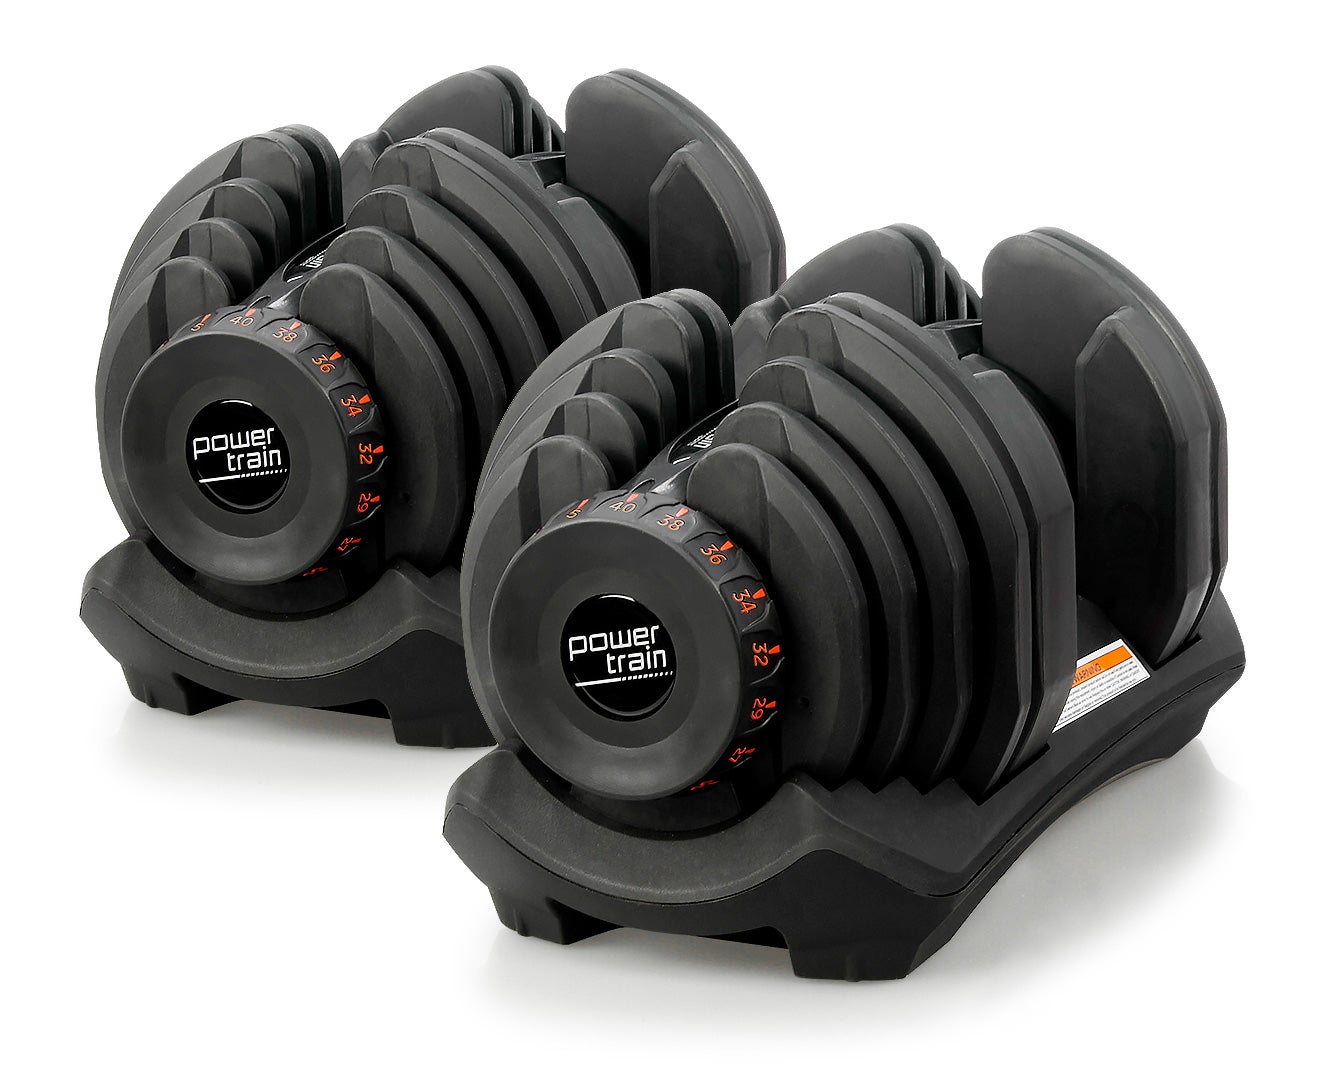 Powertrain Adjustable Dumbbells Set Home Gym Exercise Equipment Free Weights 80kg